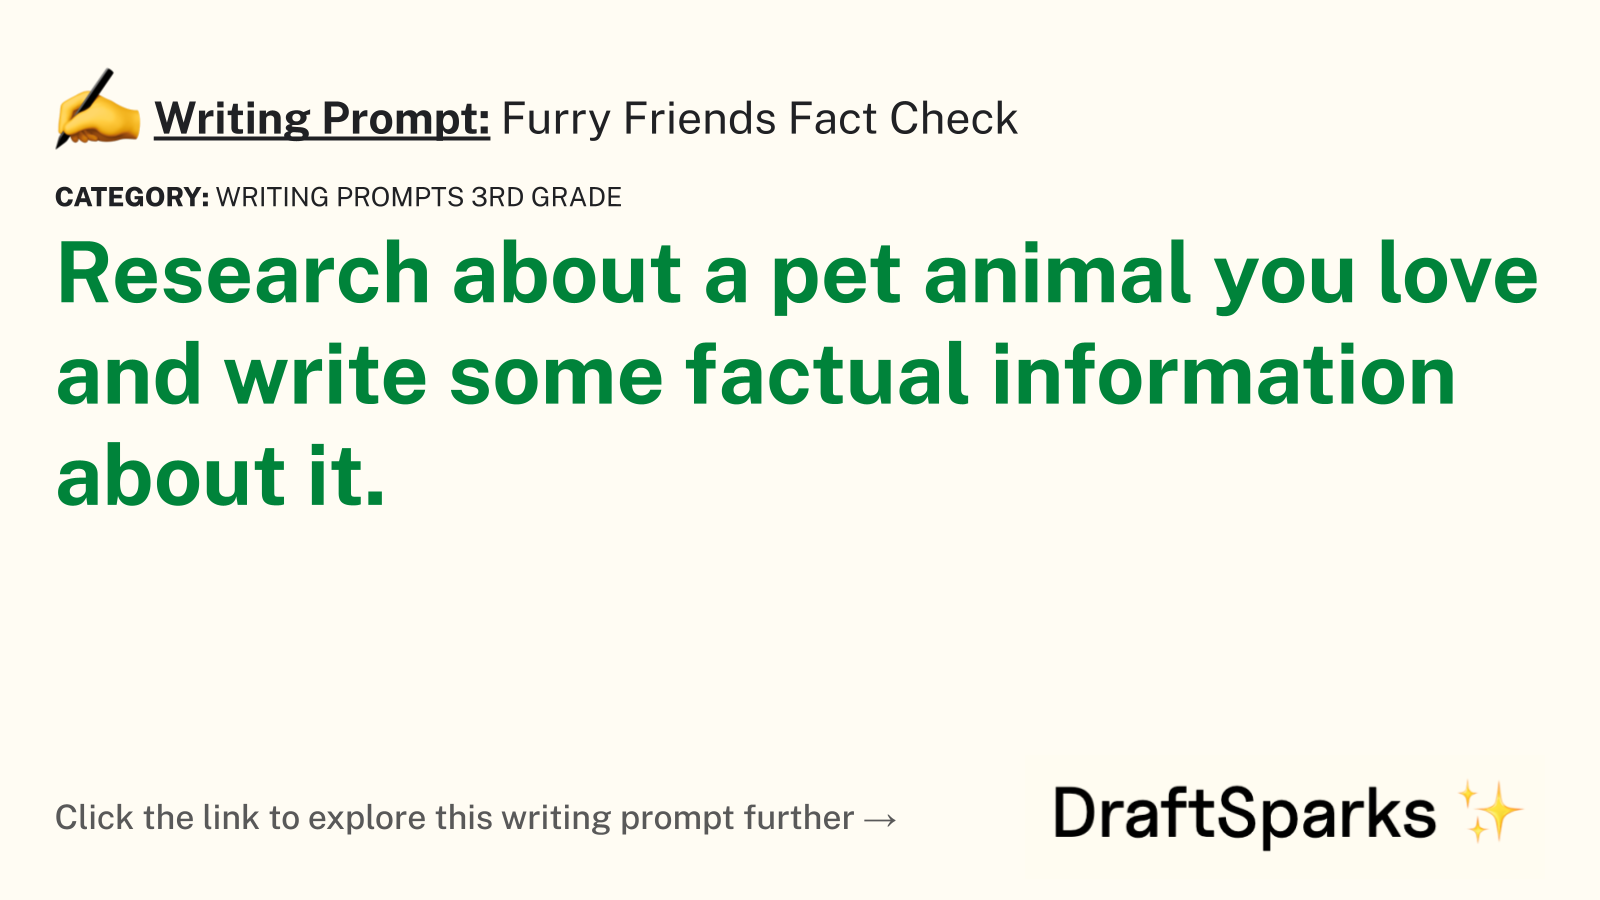 Furry Friends Fact Check